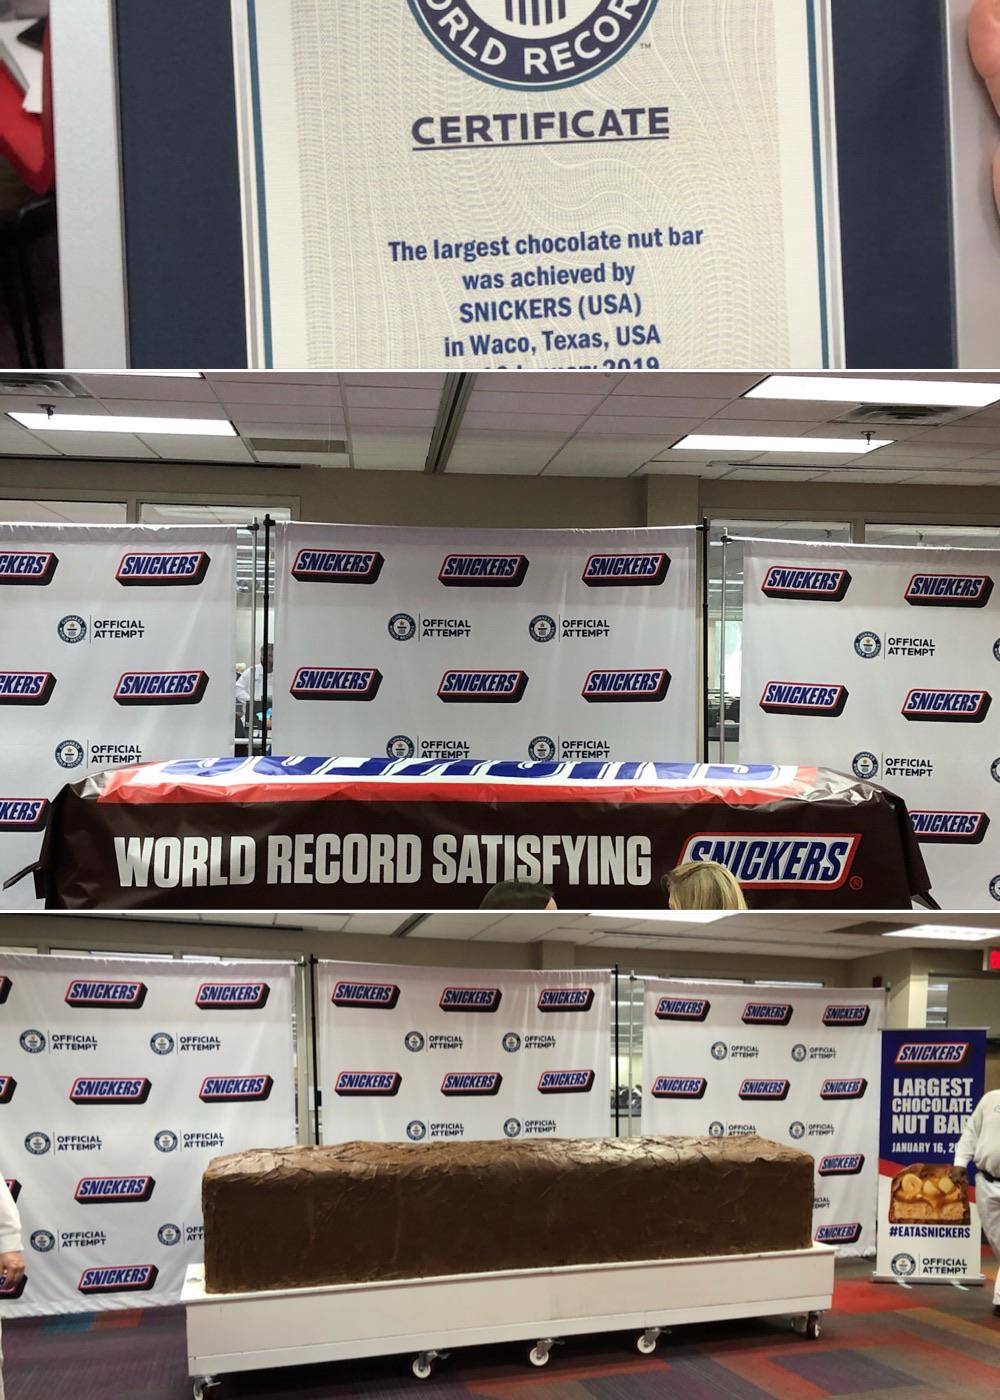 Certificate The largest chocolate nut bar was achieved by Snickers Usa in Waco, Texas, Usa 2010 Ekers Snickers Snickers Sniekees Snickers Snickers Snickers Official Attempt Official Attempt Official Attempt Official Attempt Skees Kers Snickers Snickers…